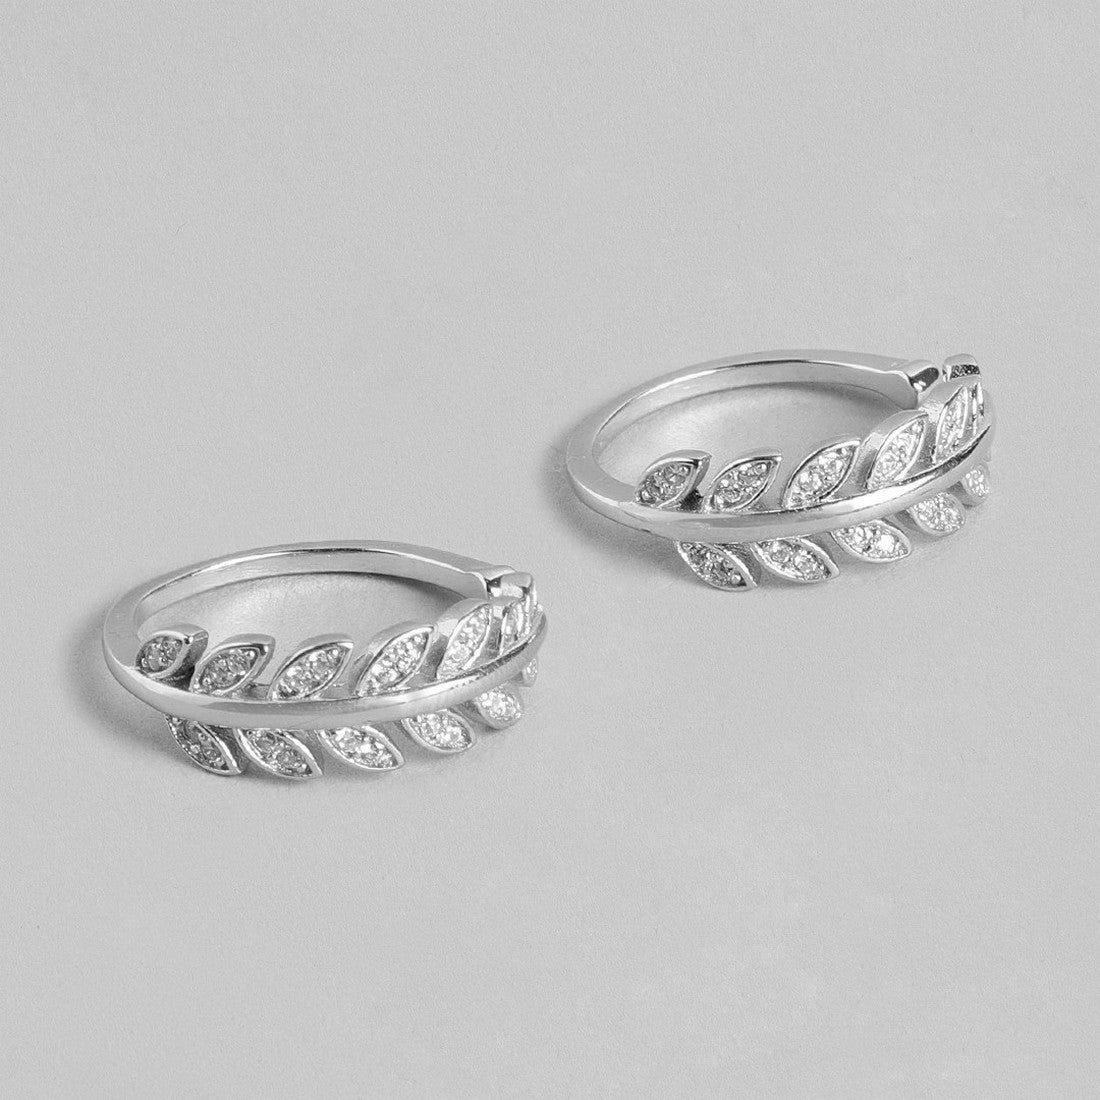 Nature's Grace - Leafy Silver Adjustable 925 Silver Toe Ring